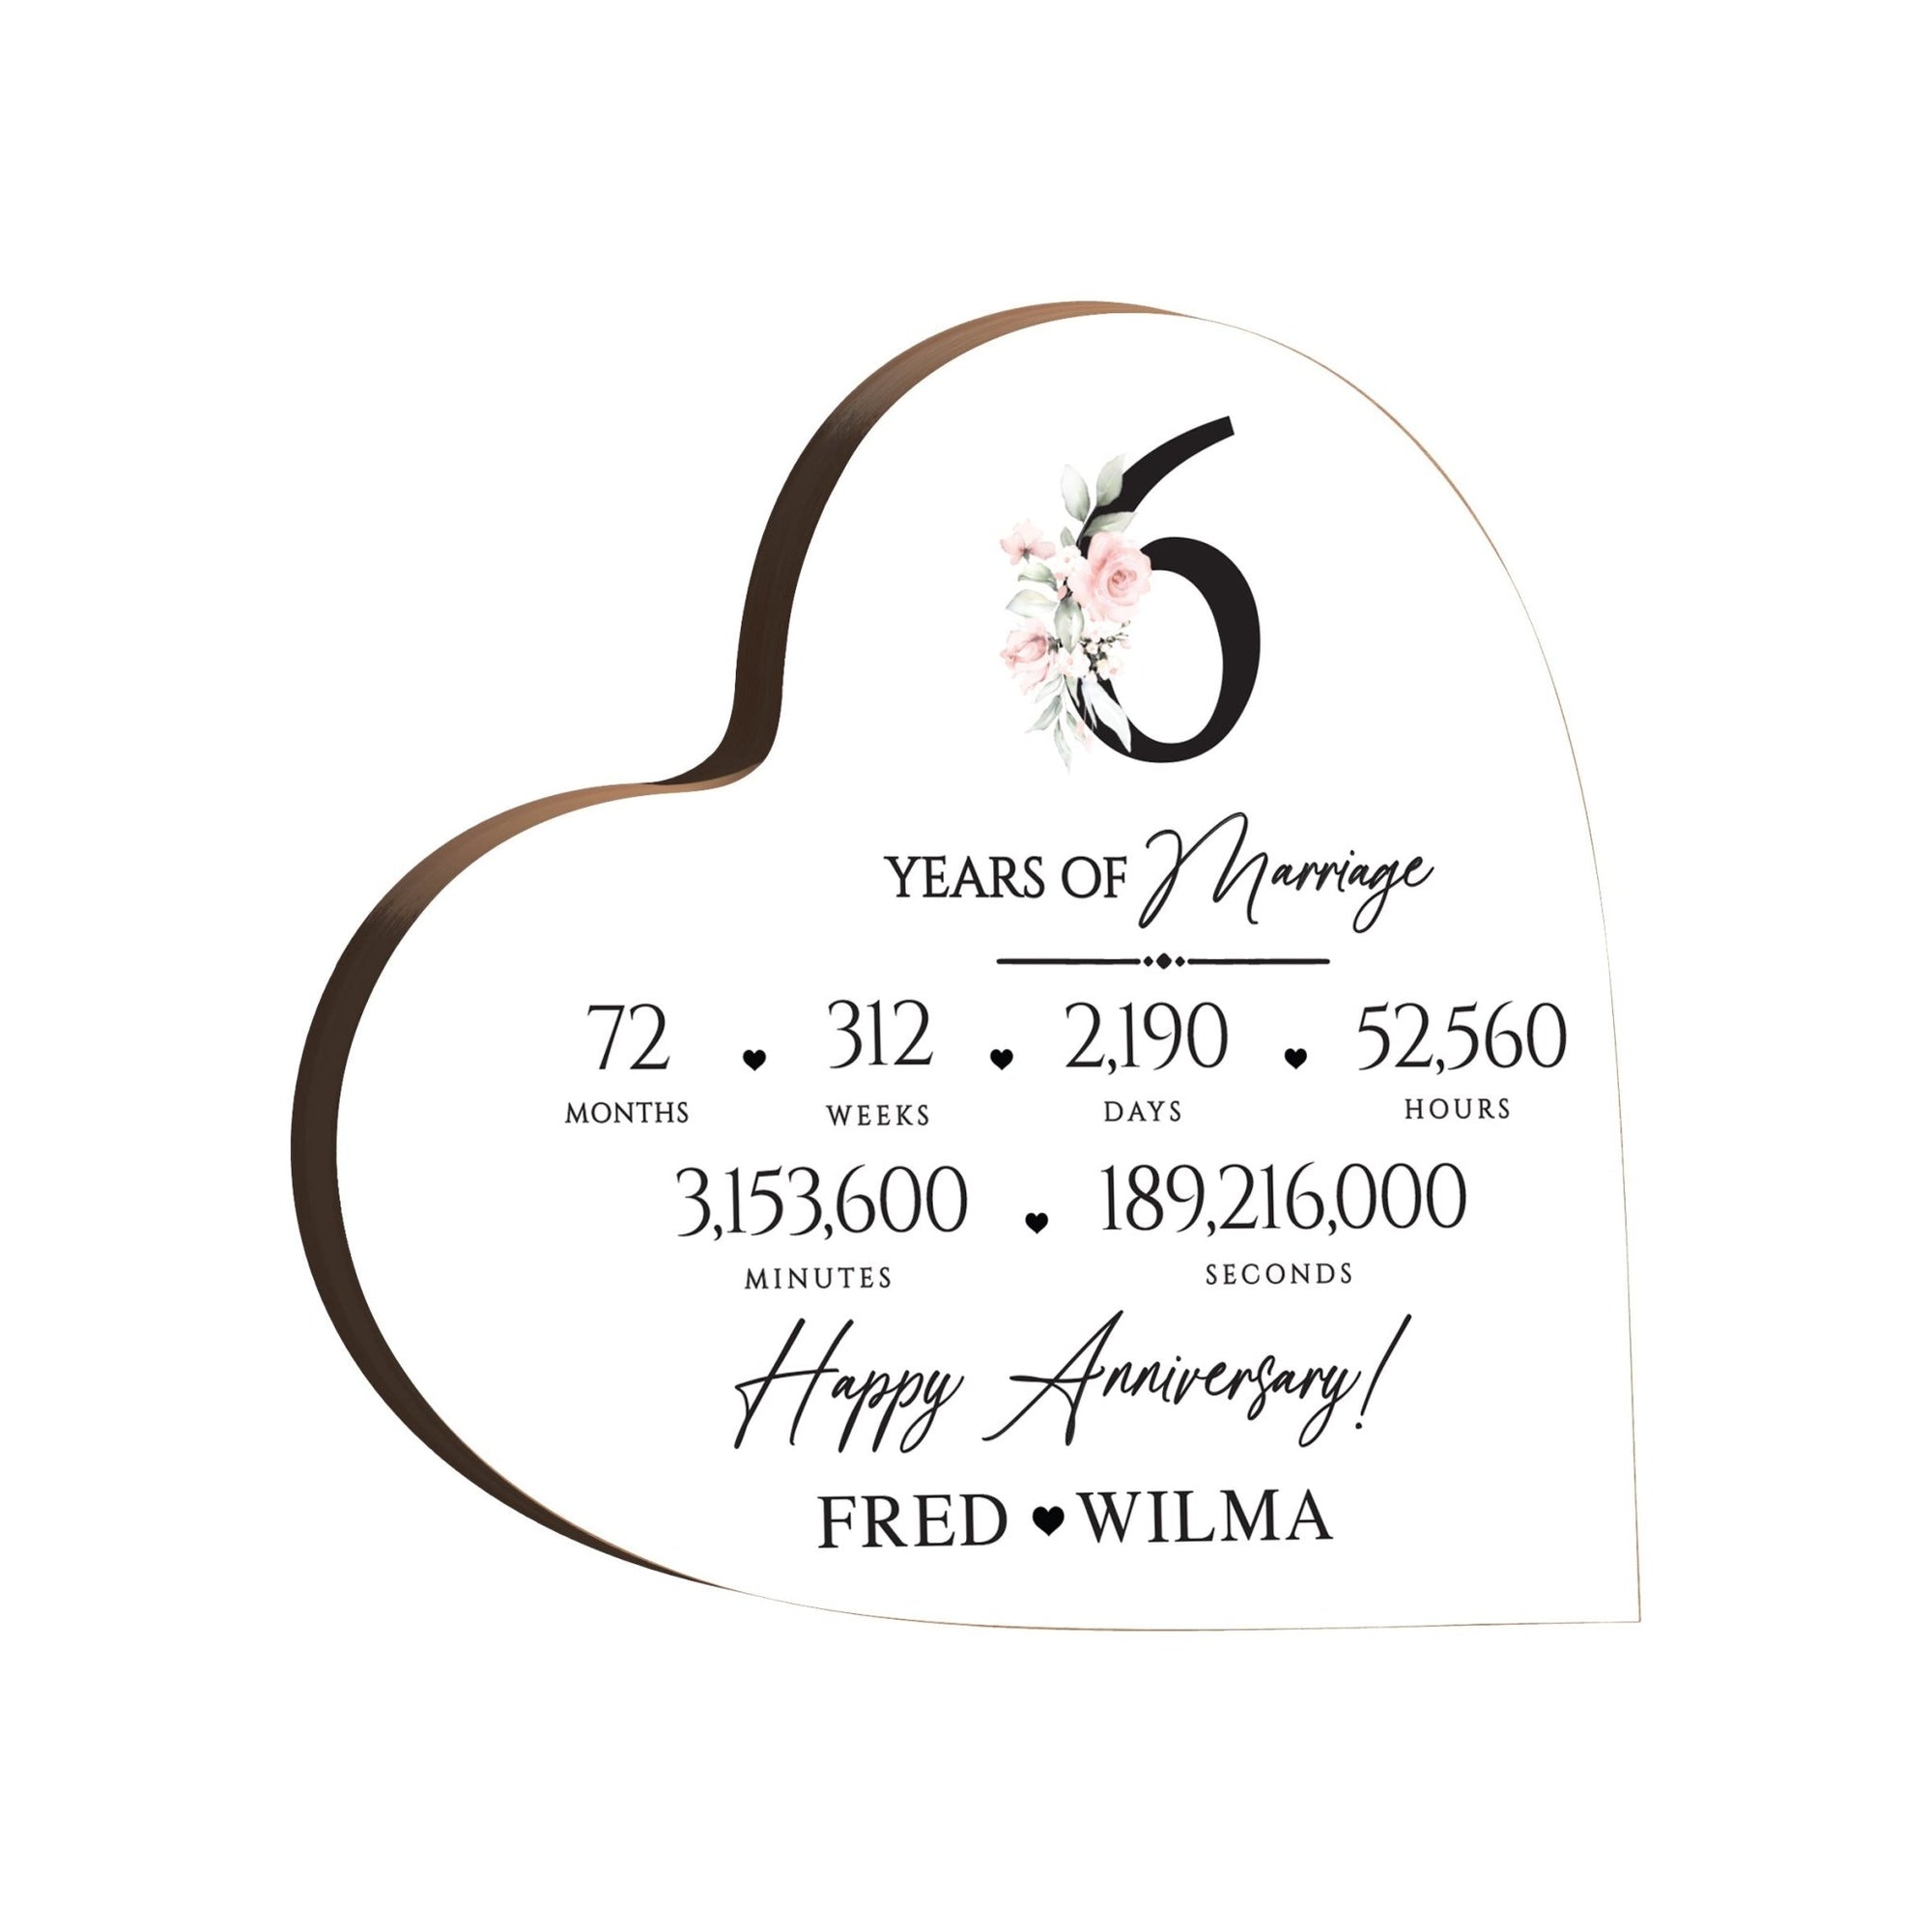 Personalized Wooden Anniversary Heart Shaped Signs - 6th Anniversary - LifeSong Milestones